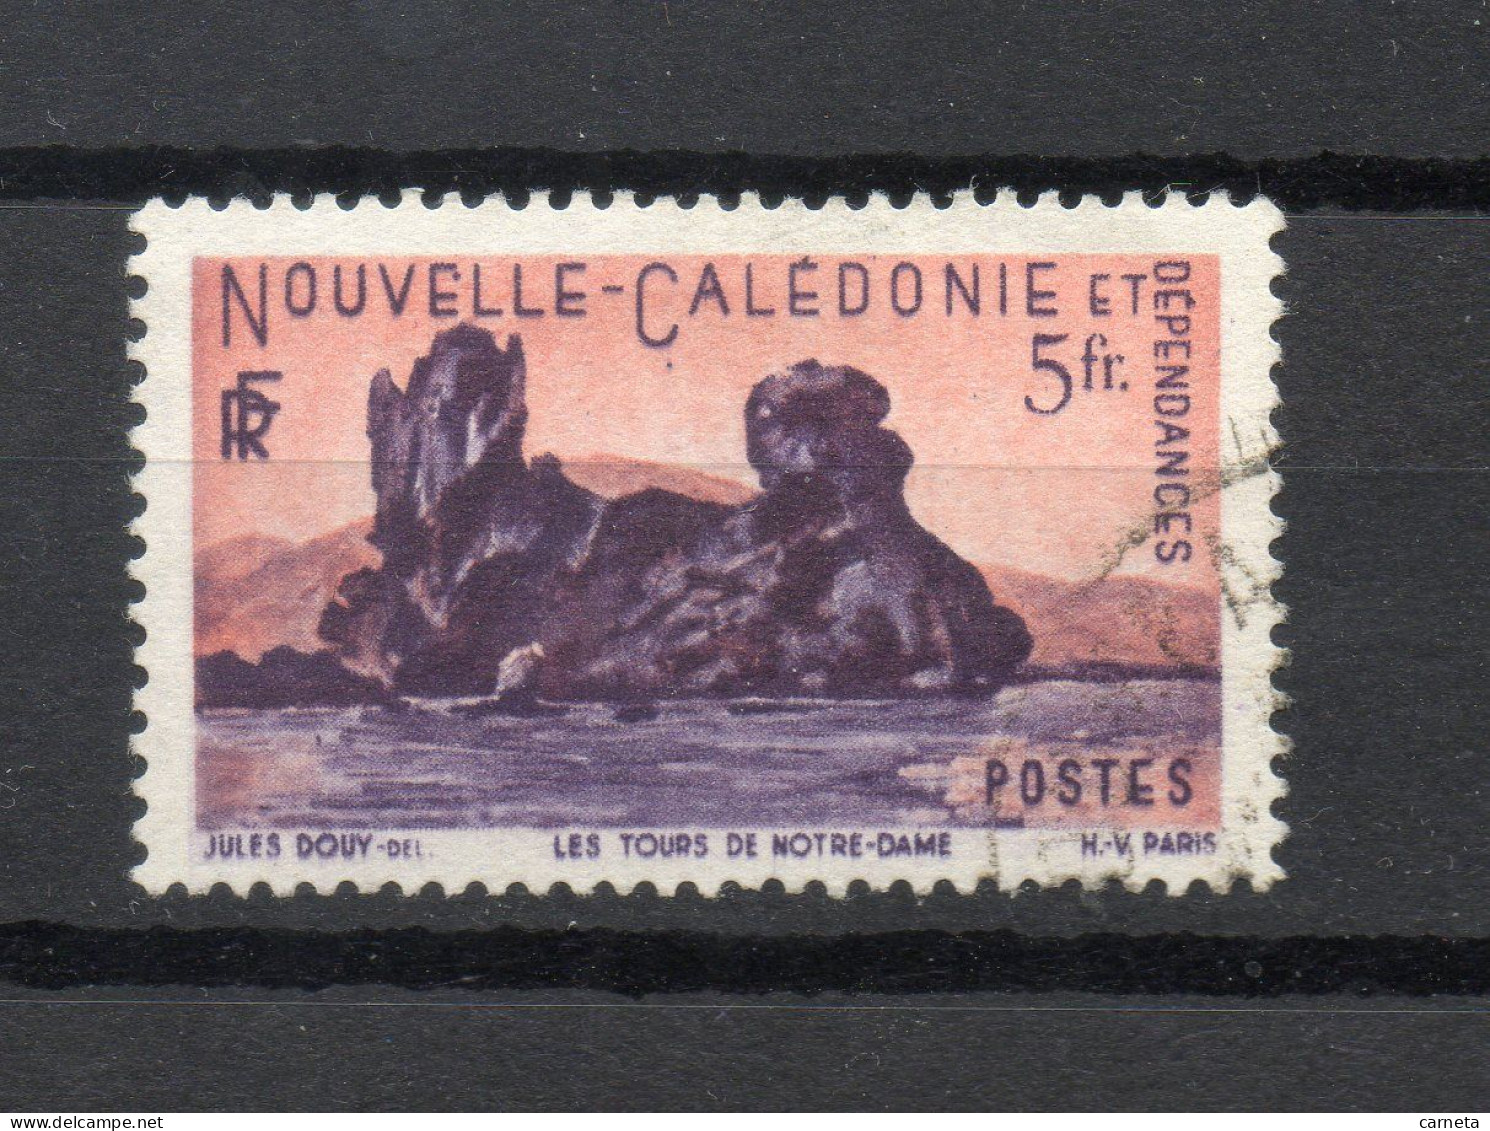 Nlle CALEDONIE N° 272   OBLITERE COTE 1.50€   PAYSAGE - Used Stamps